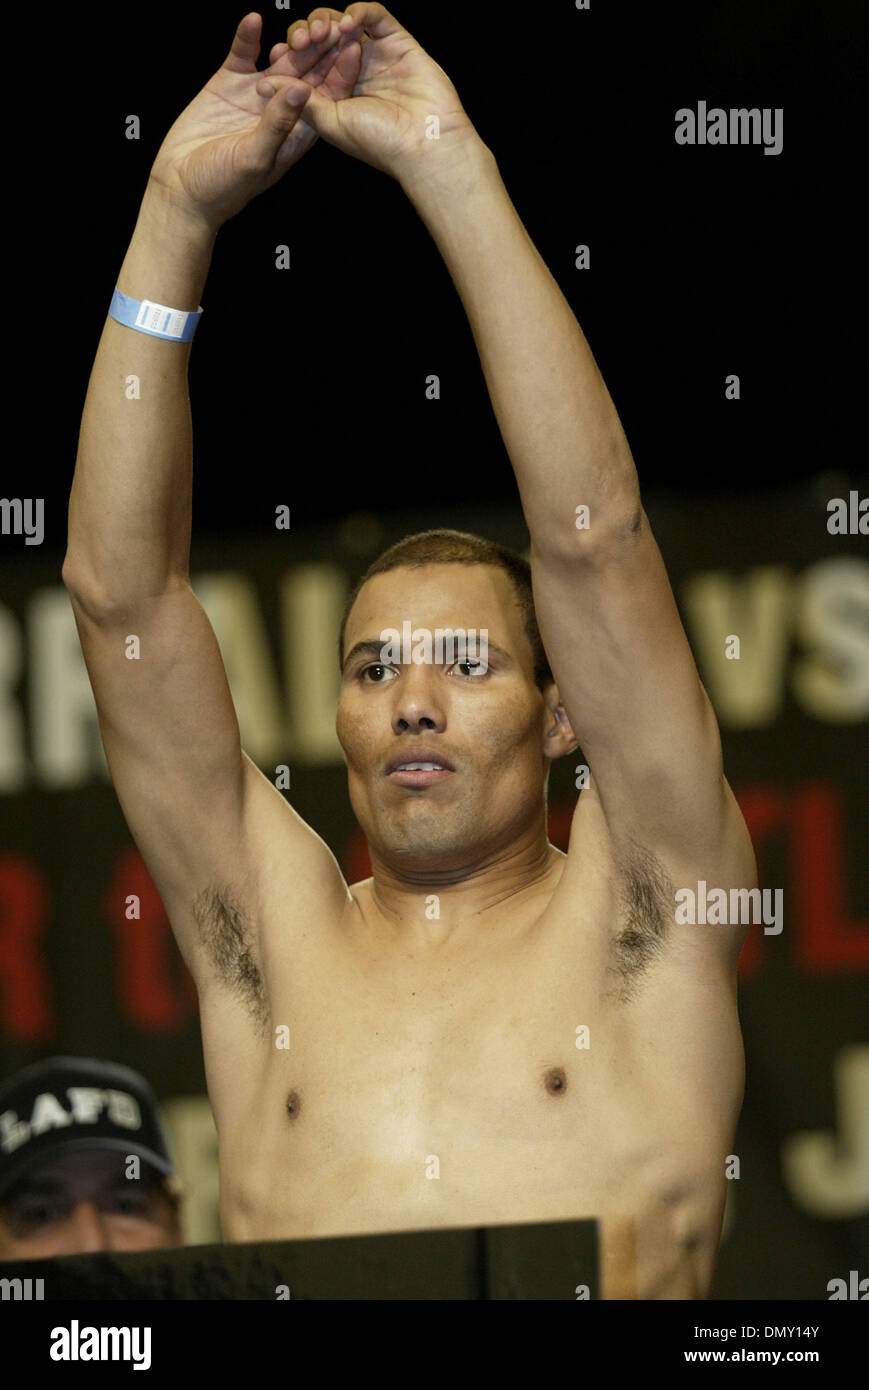 Jun 02, 2006; Las Vegas, NV, USA; JOSE LUIS CASTILLO weighing in at Caesars Palace Hotel & Casino in Las Vegas. Castillo who was scheduled to fight for the WBC World Lightweight Championship 06-03-06 against Diego 'Chico' Corrales lost to the scale weighing 145 Lb. five pounds over the contact fight weight of 135 lB. Castillo attempted to lose two pounds but failed, resulting in th Stock Photo